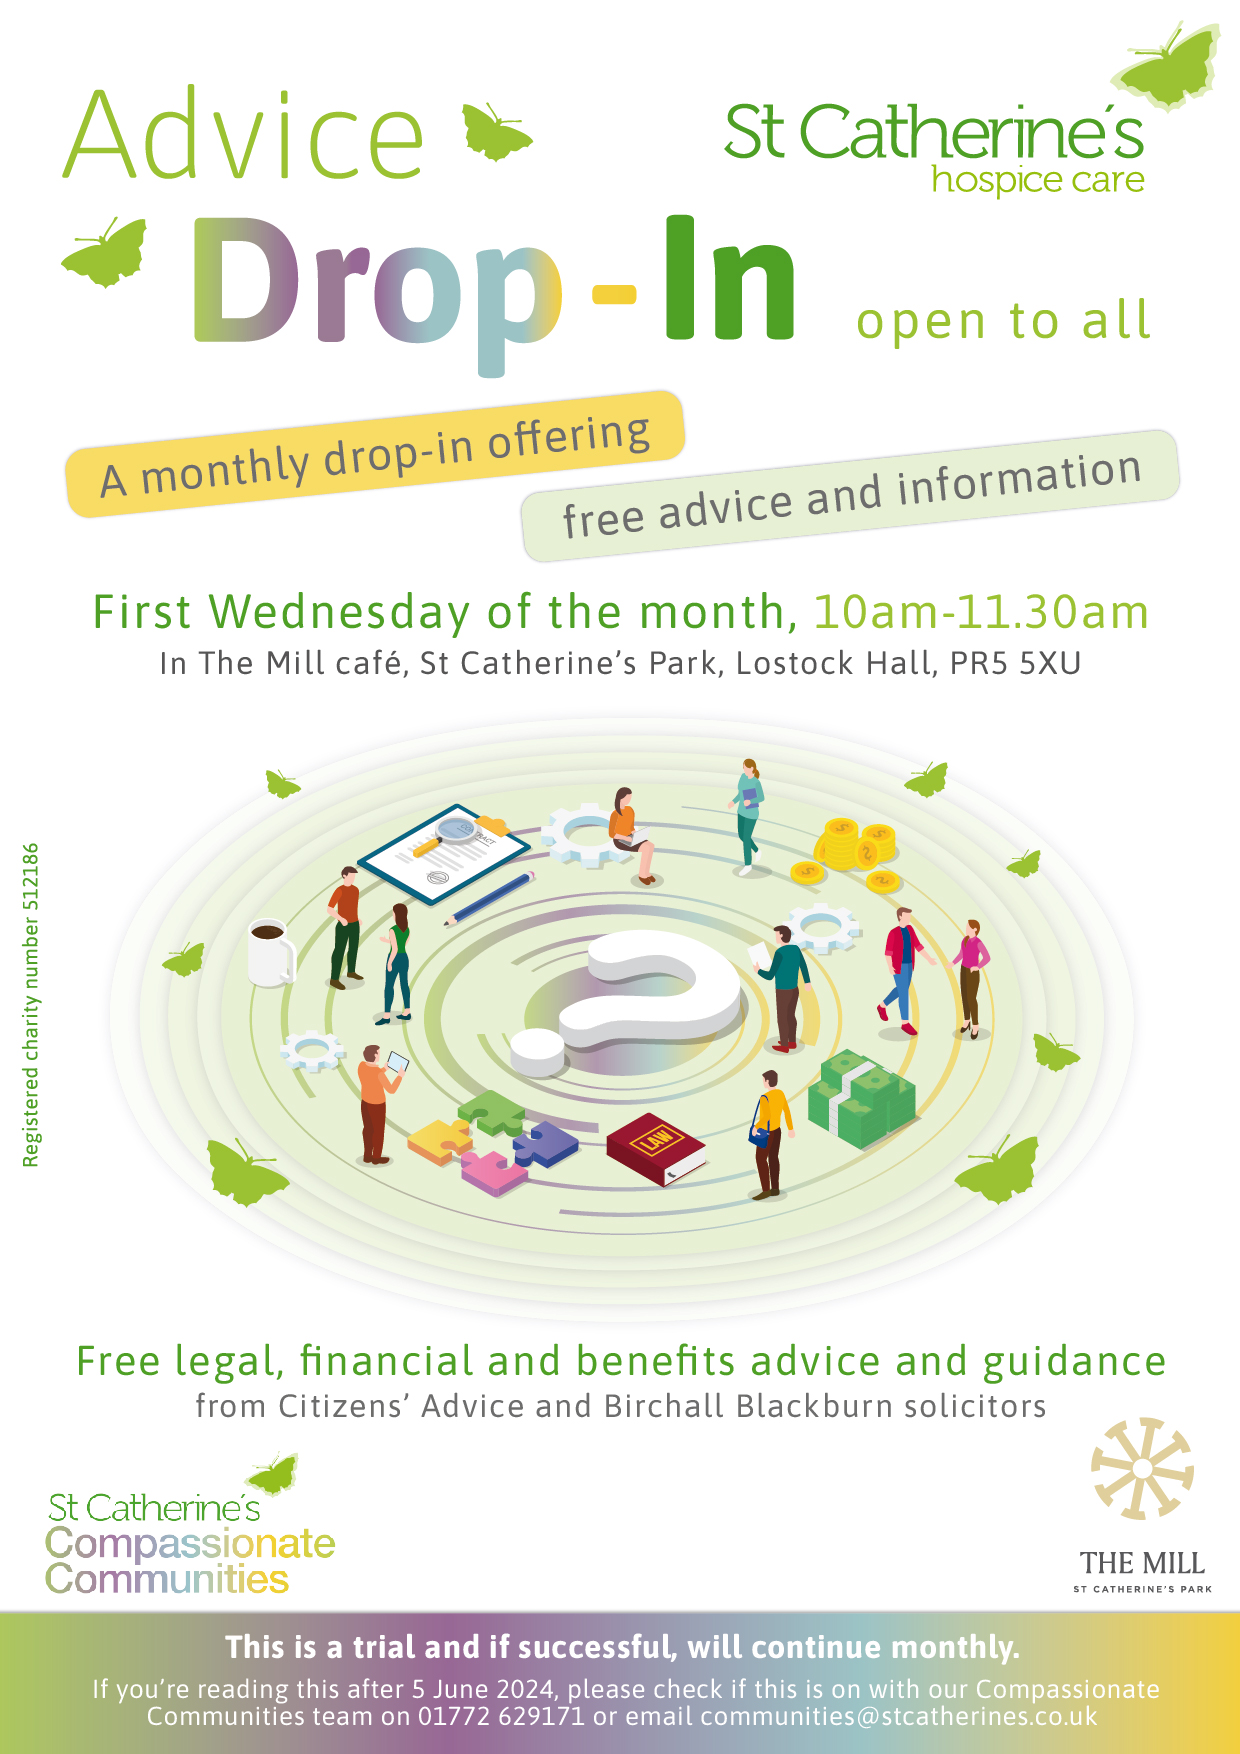 First Wednesday of the month drop in for advice at the Mill Cafe, 10am-11.30am